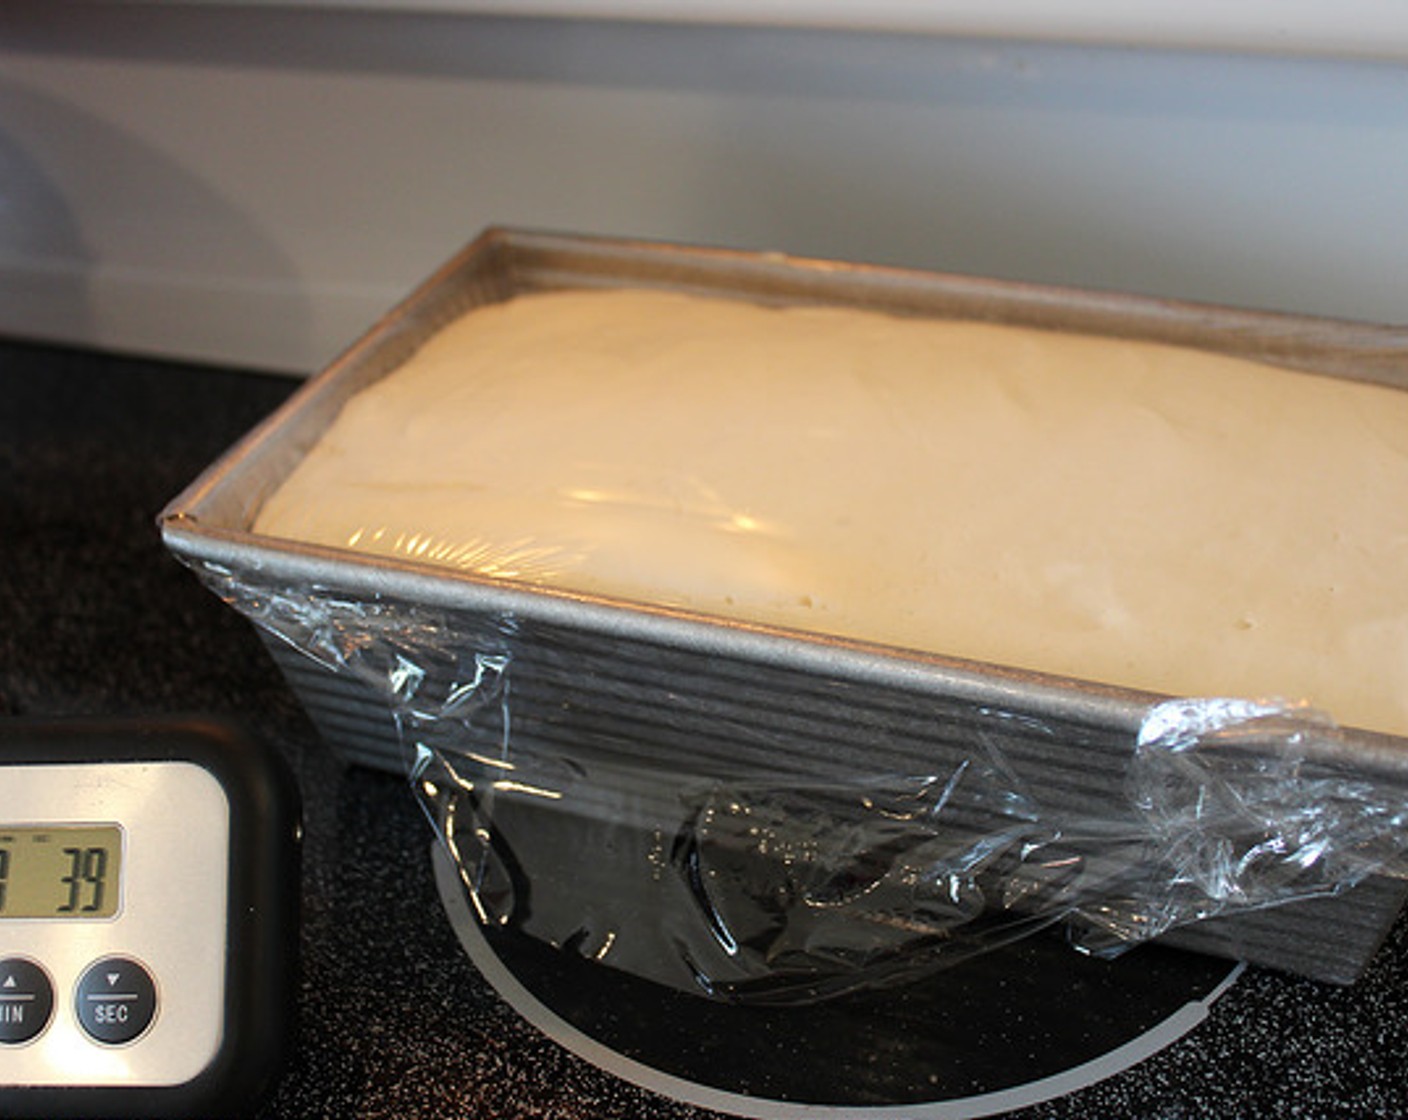 step 11 Using a spatula, scrape the bread mixture into your prepared loaf pan and cover with plastic wrap. Set pan on top of your warm stove to proof while the oven is preheating.